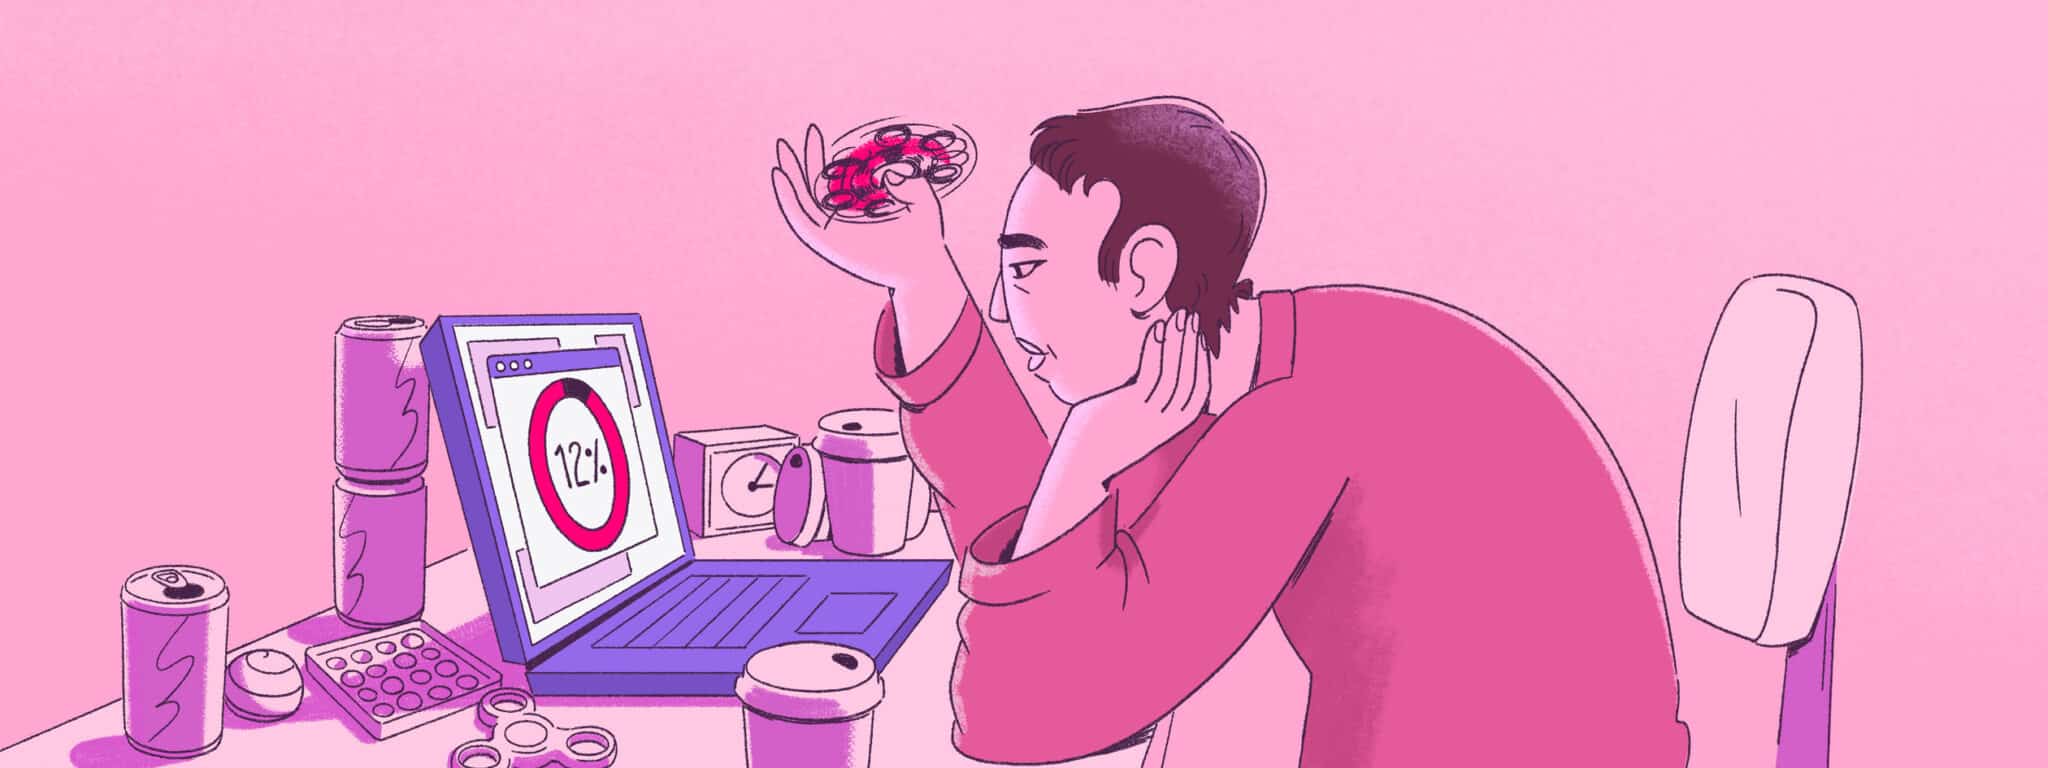 An illustration of a man with dark hair looking at a computer waiting for a load screen to complete. He is spinning a fidget spinner idly.